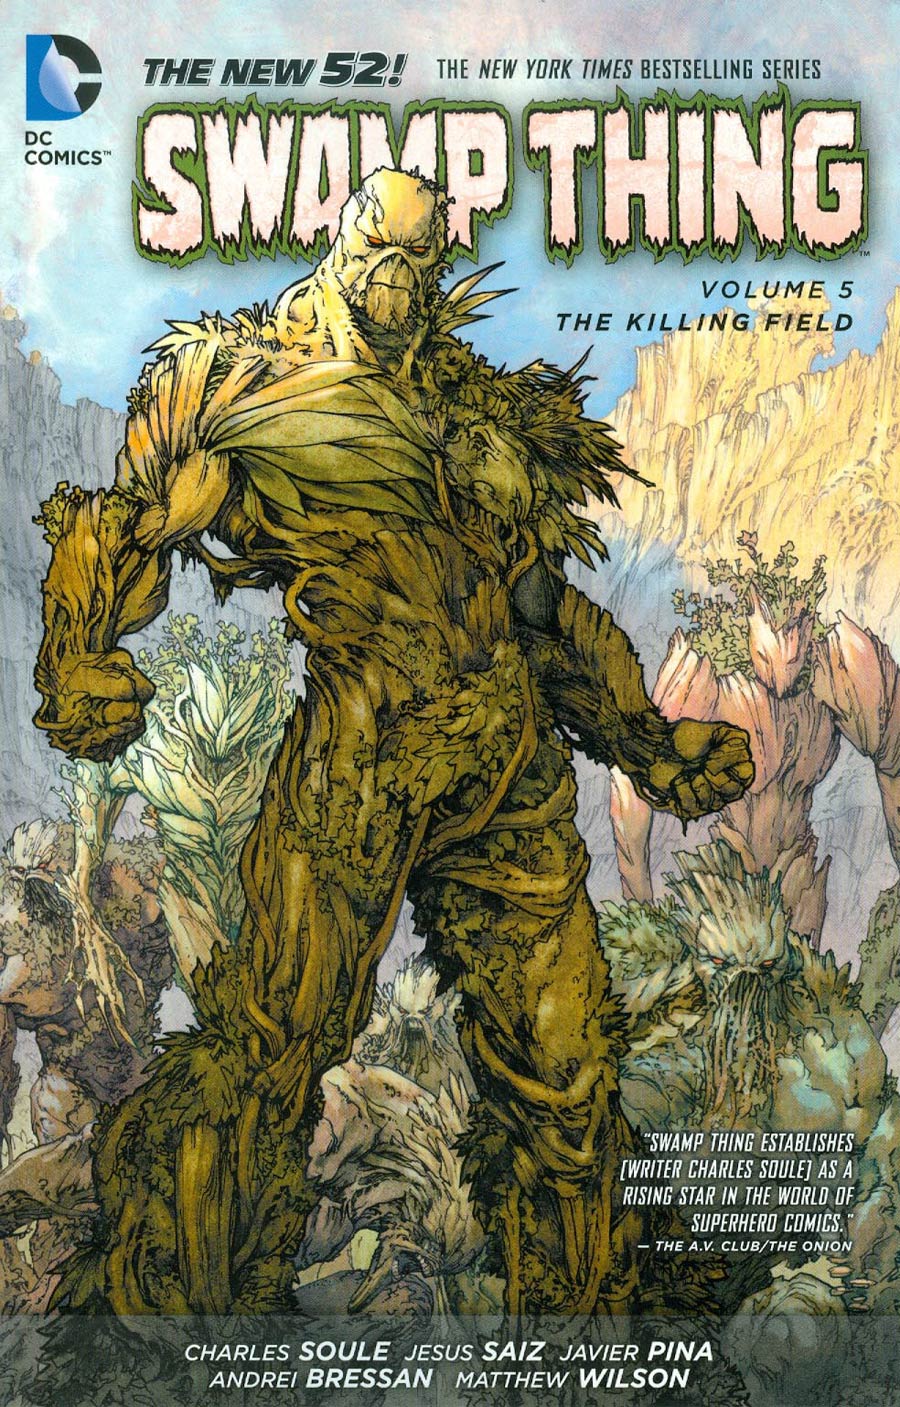 Swamp Thing (New 52) Vol 5 The Killing Field TP